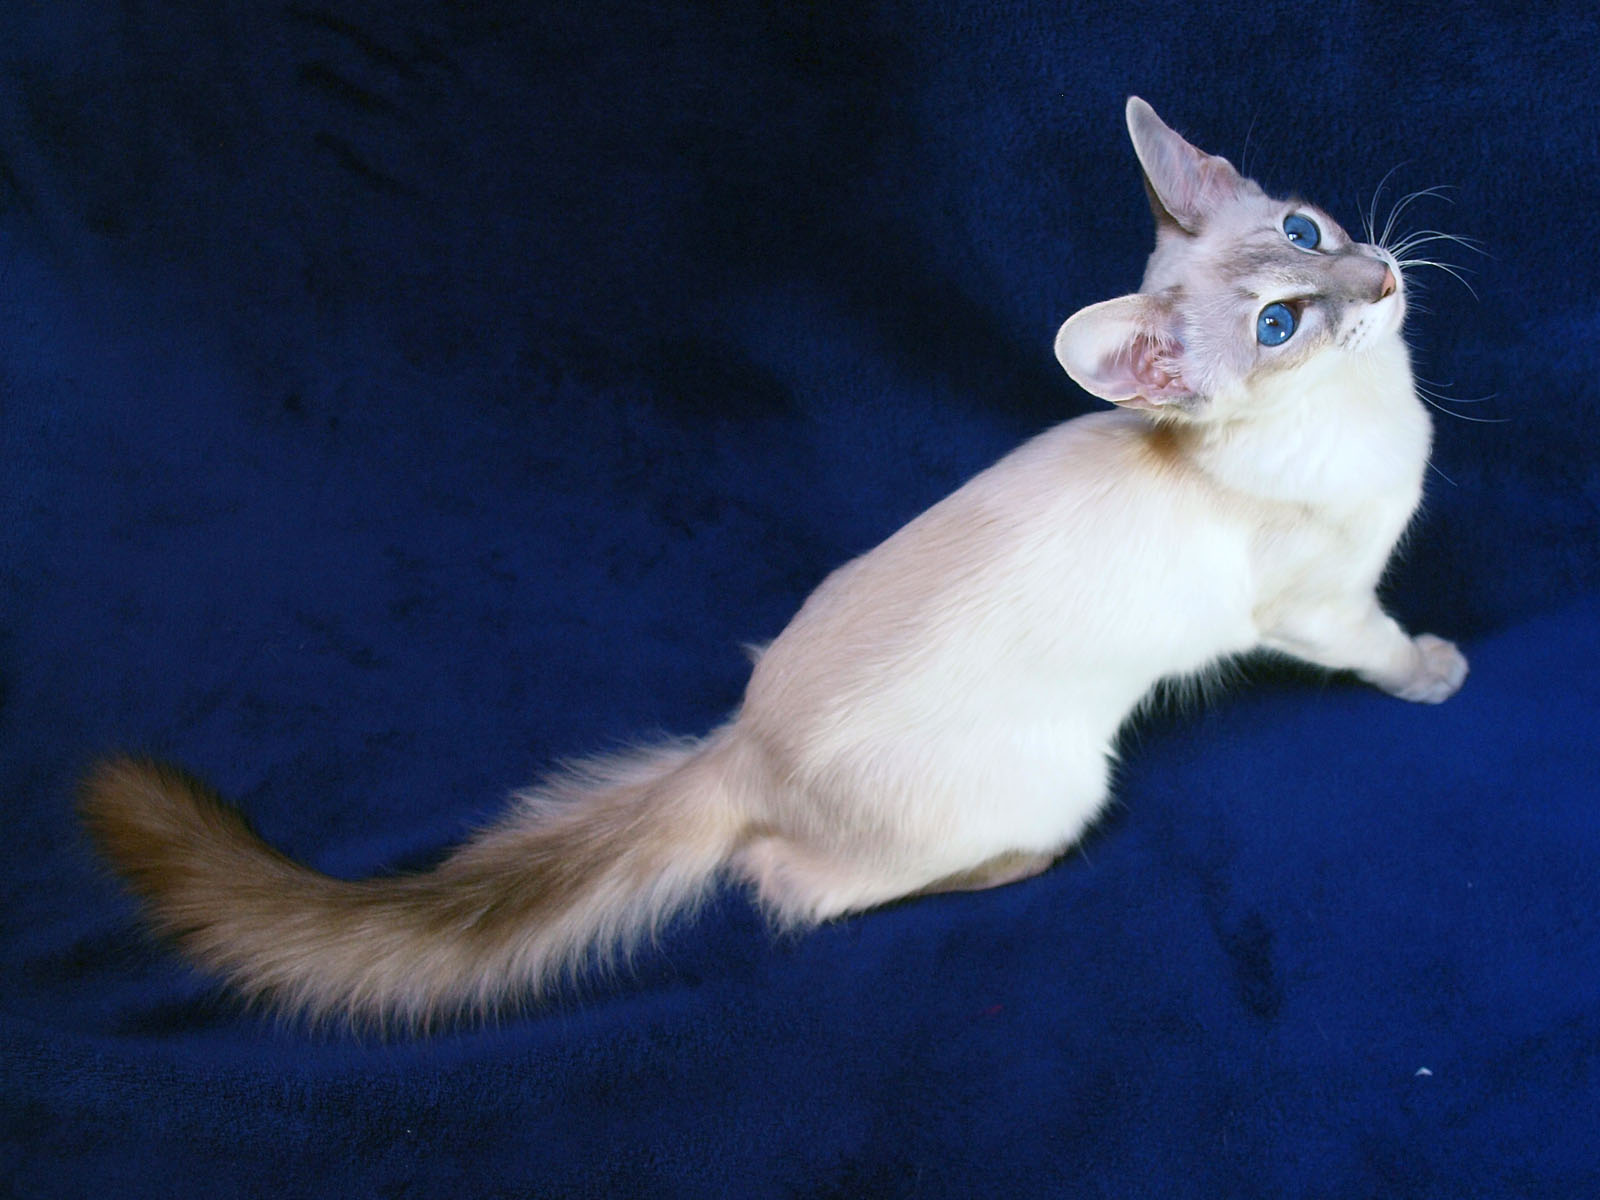 The Balinese cat